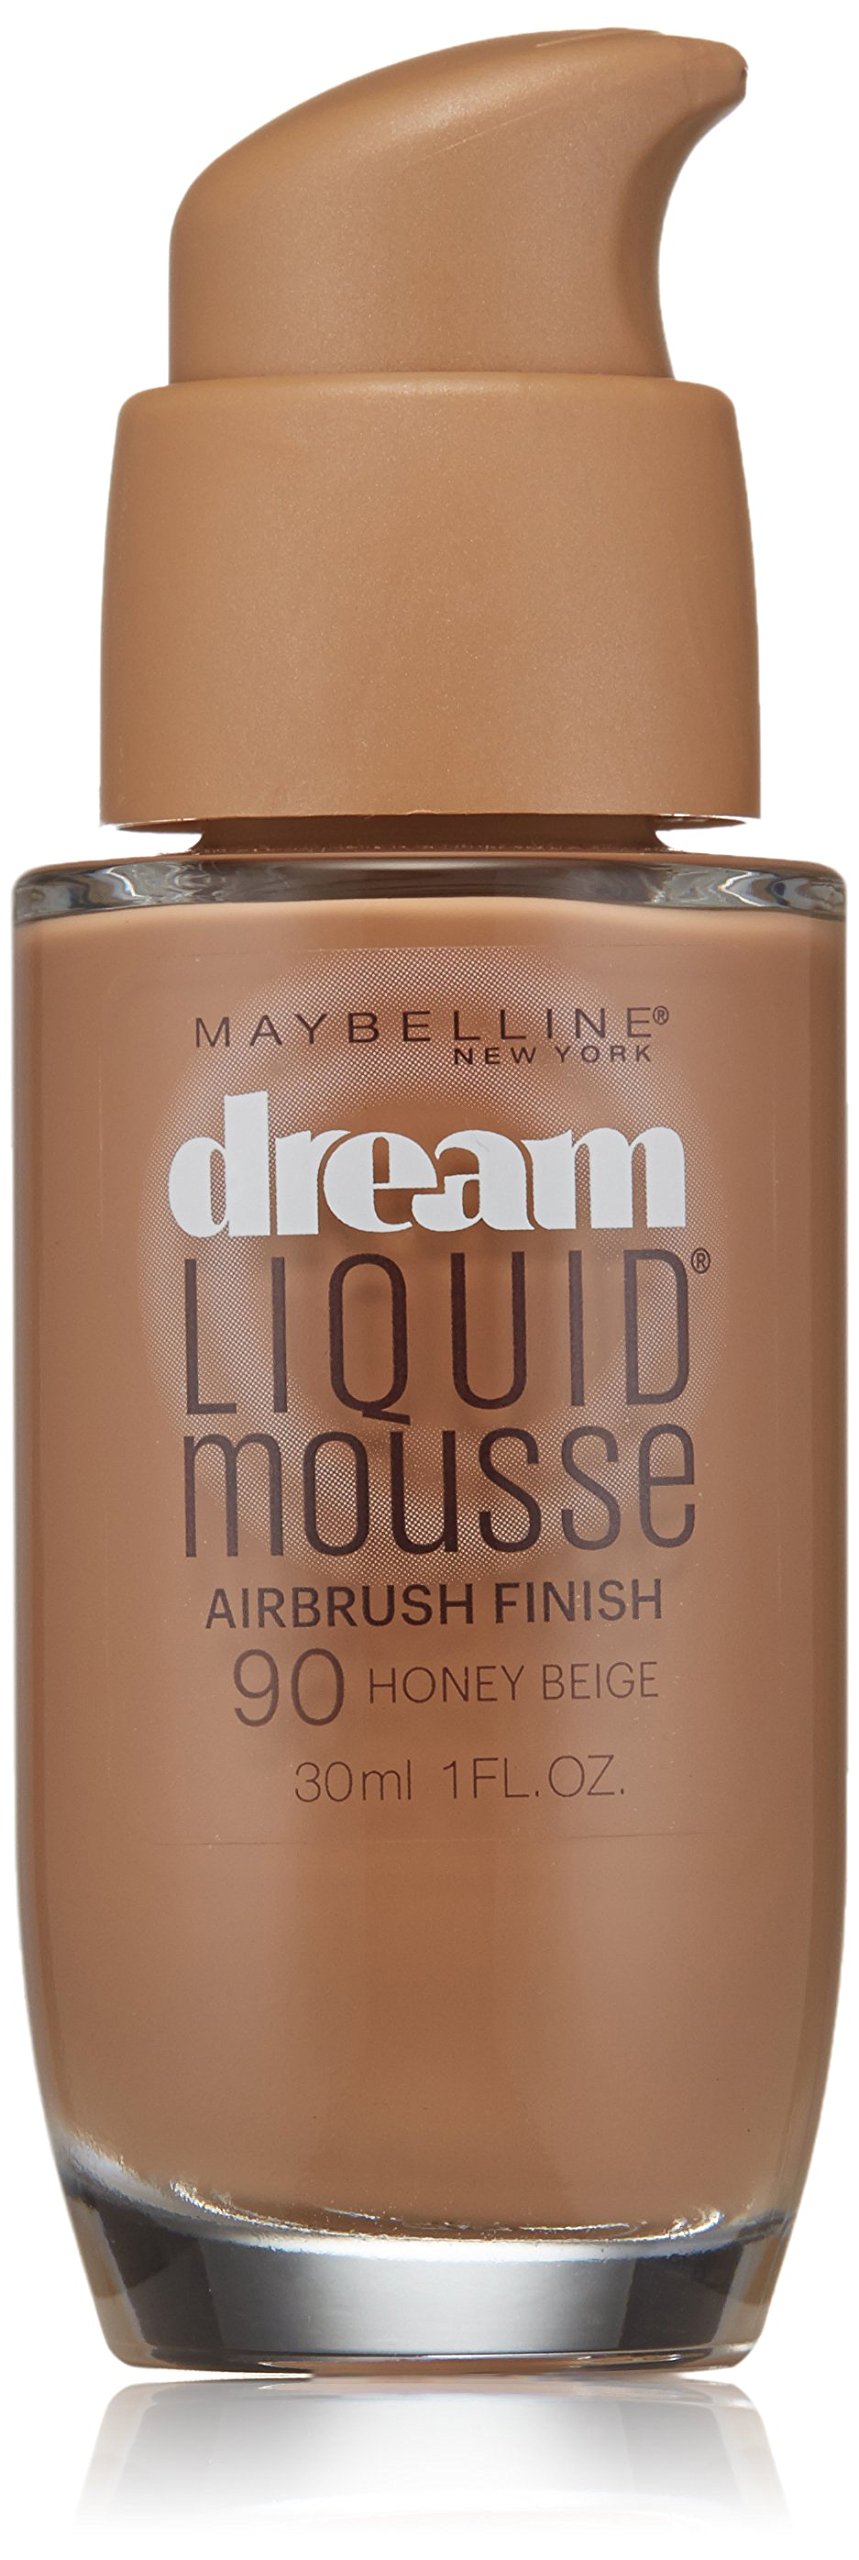 Maybelline New York Dream Liquid Mousse Foundation, Honey Beige, 1 Fluid Ounce(Packaging May Vary)